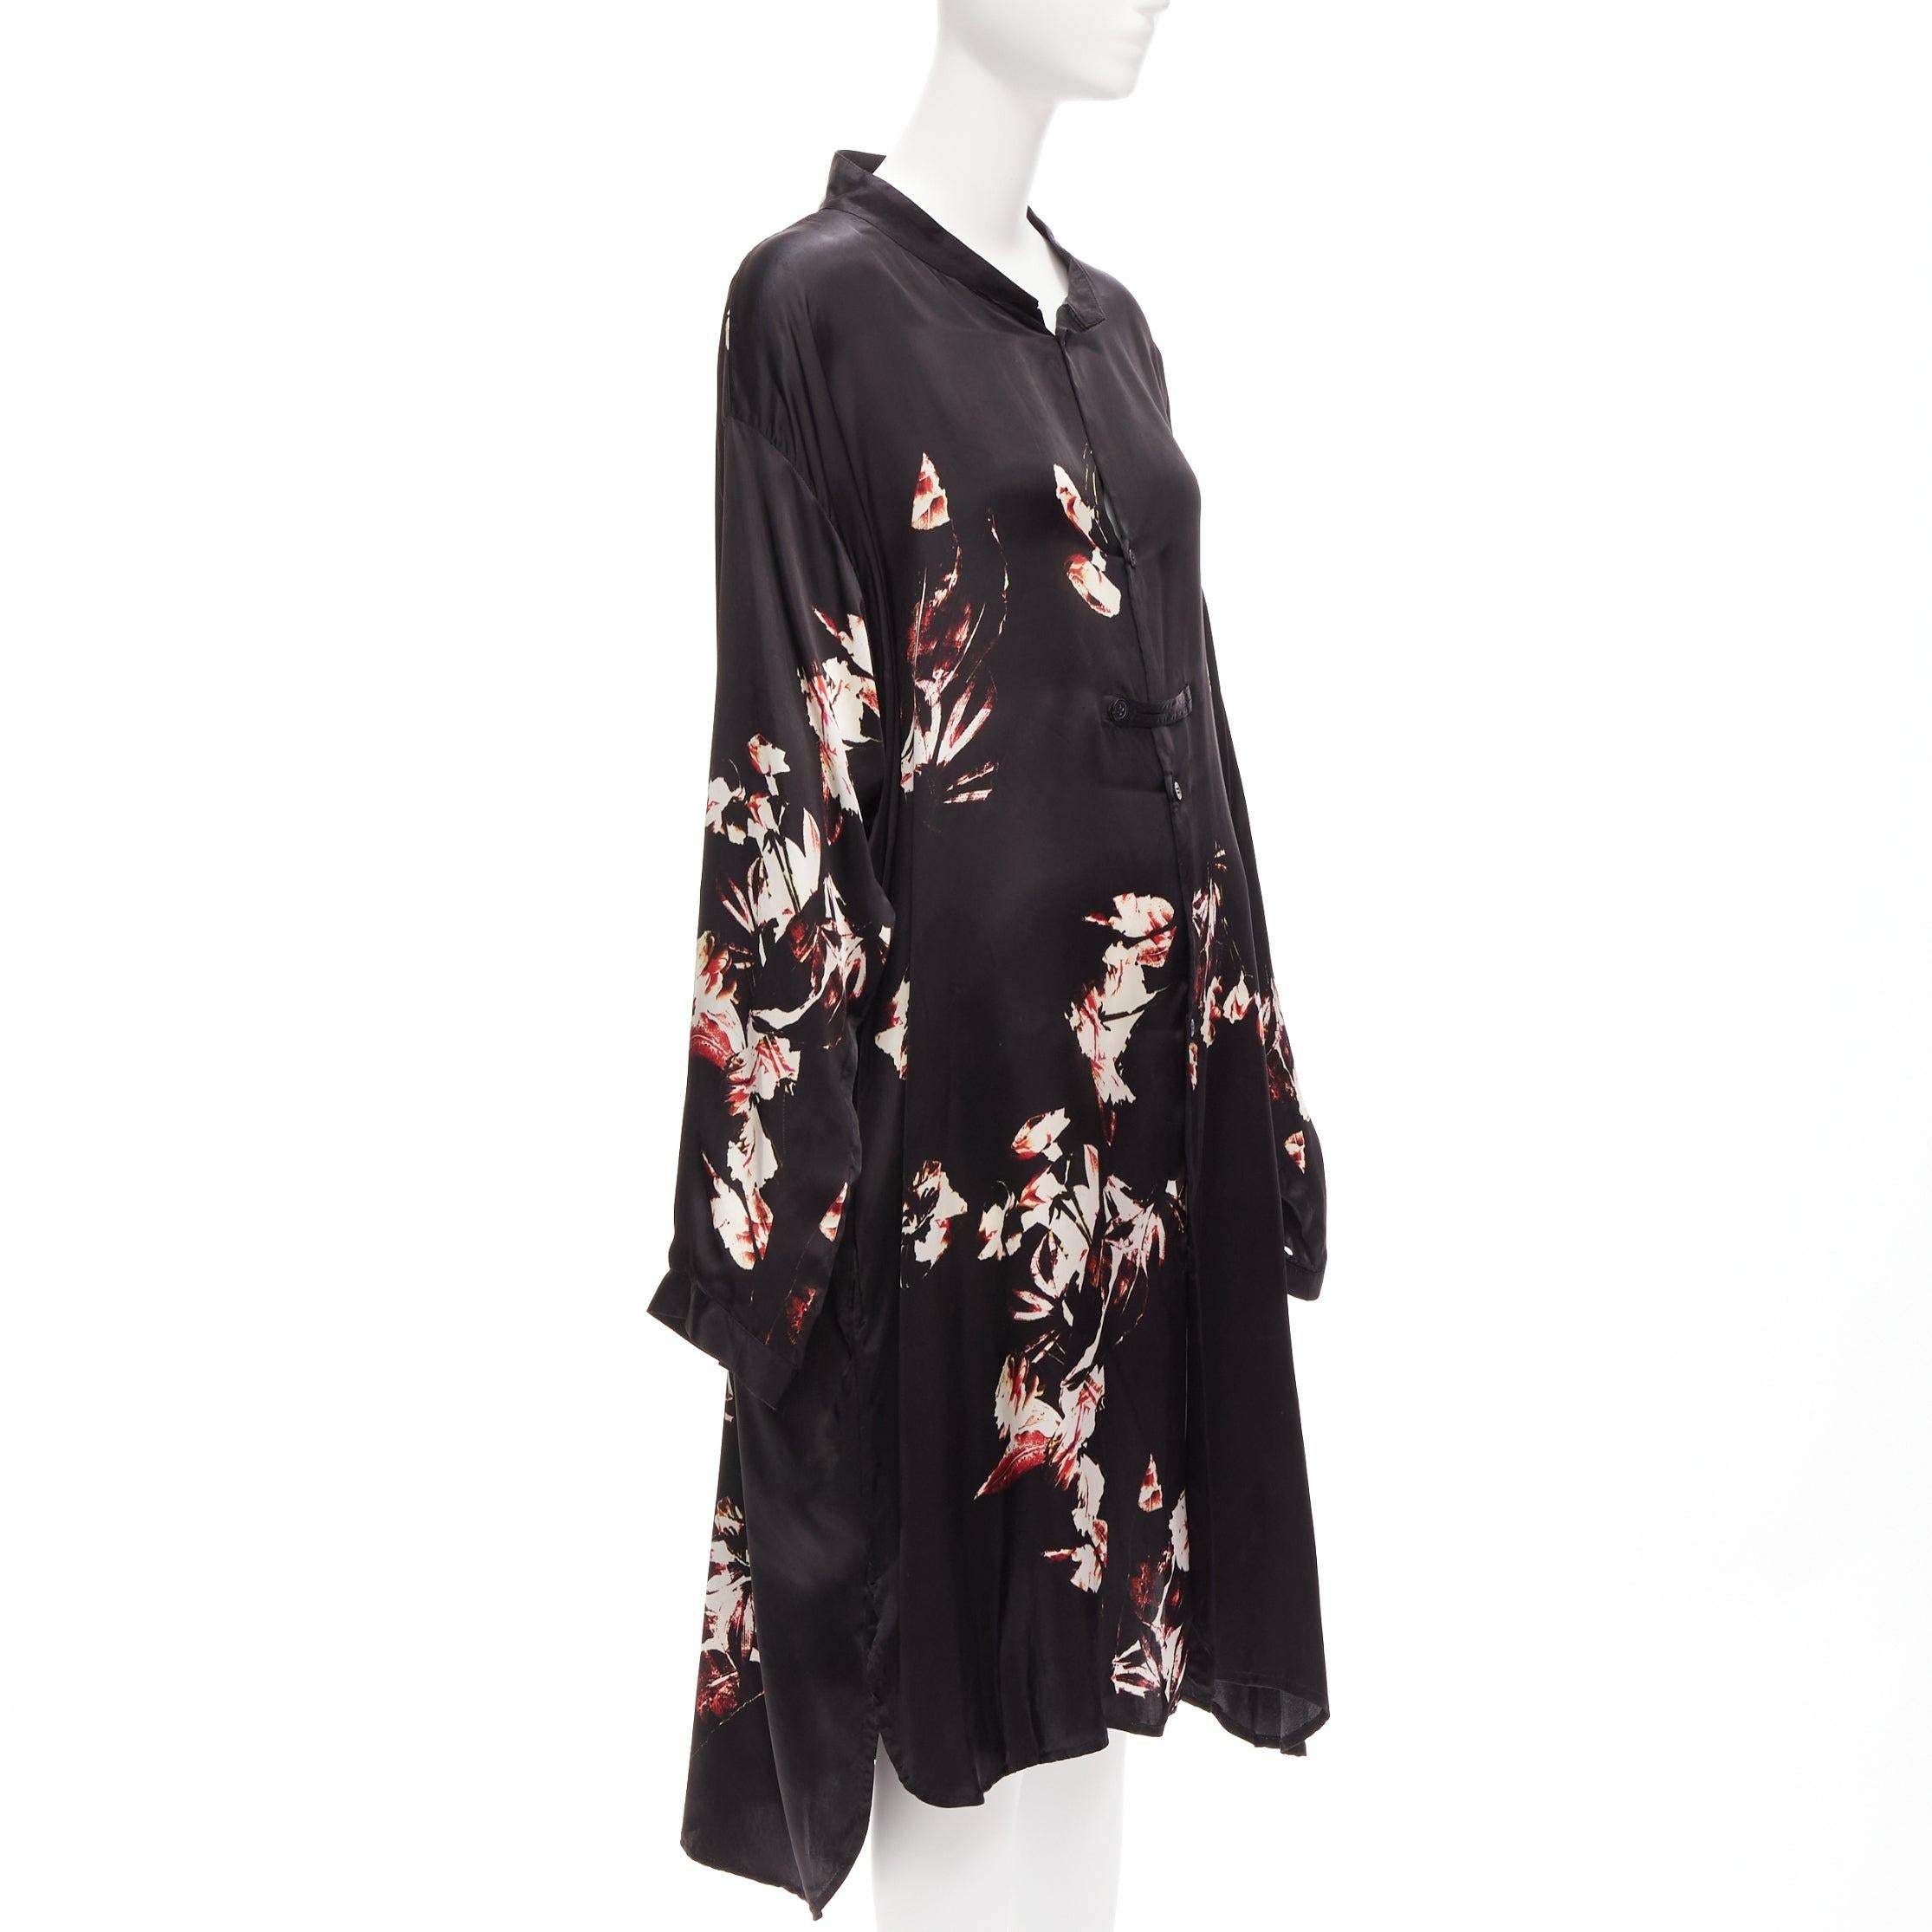 Y'S YOHJI YAMAMOTO black silky floral print chinese buttons robe dress JP2 M
Reference: JACG/A00139
Brand: Y's Yohji Yamamoto
Collection: Y'S
Material: Cupro
Color: Black, Multicolour
Pattern: Floral
Closure: Button
Made in: